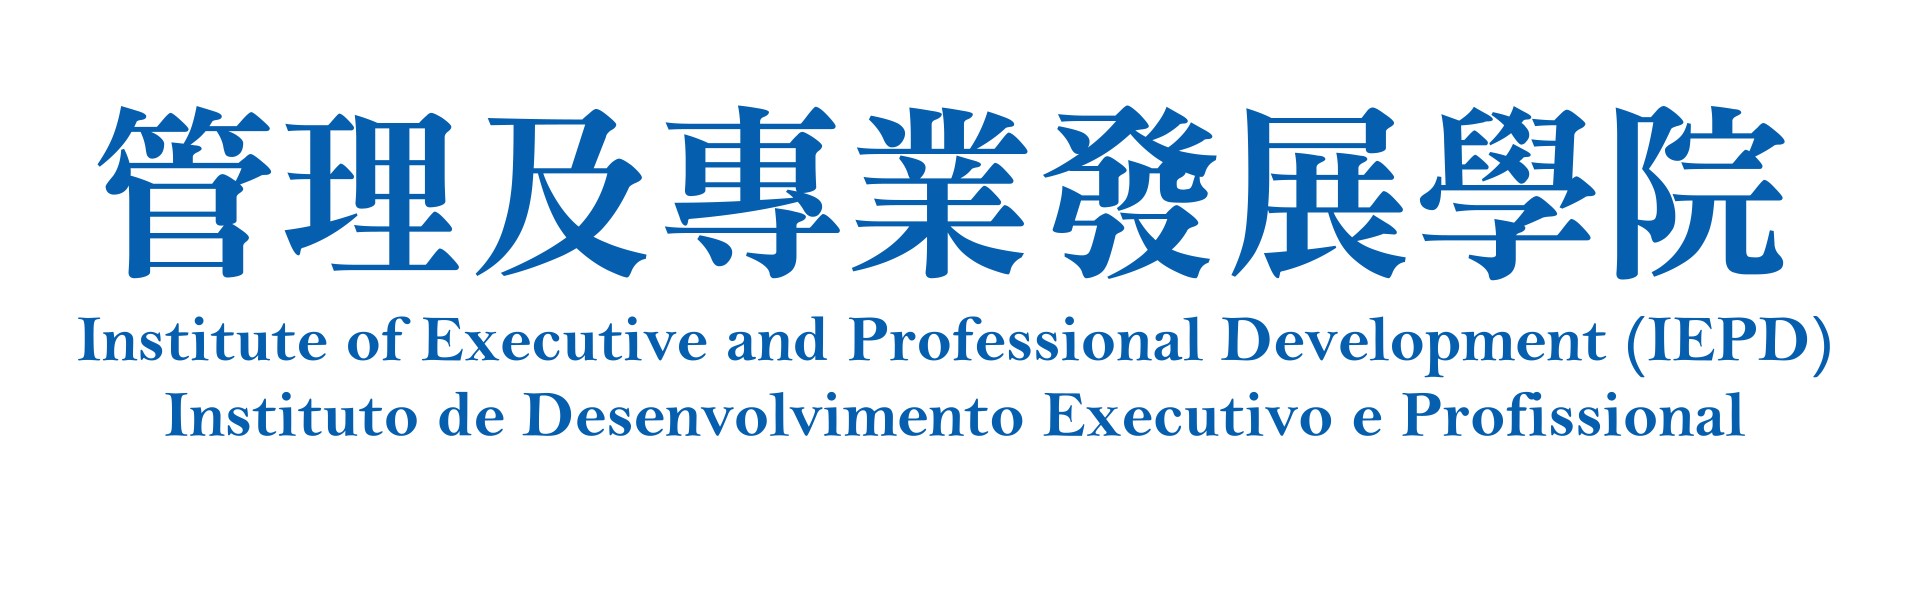 Institute of Executive and Professional Development